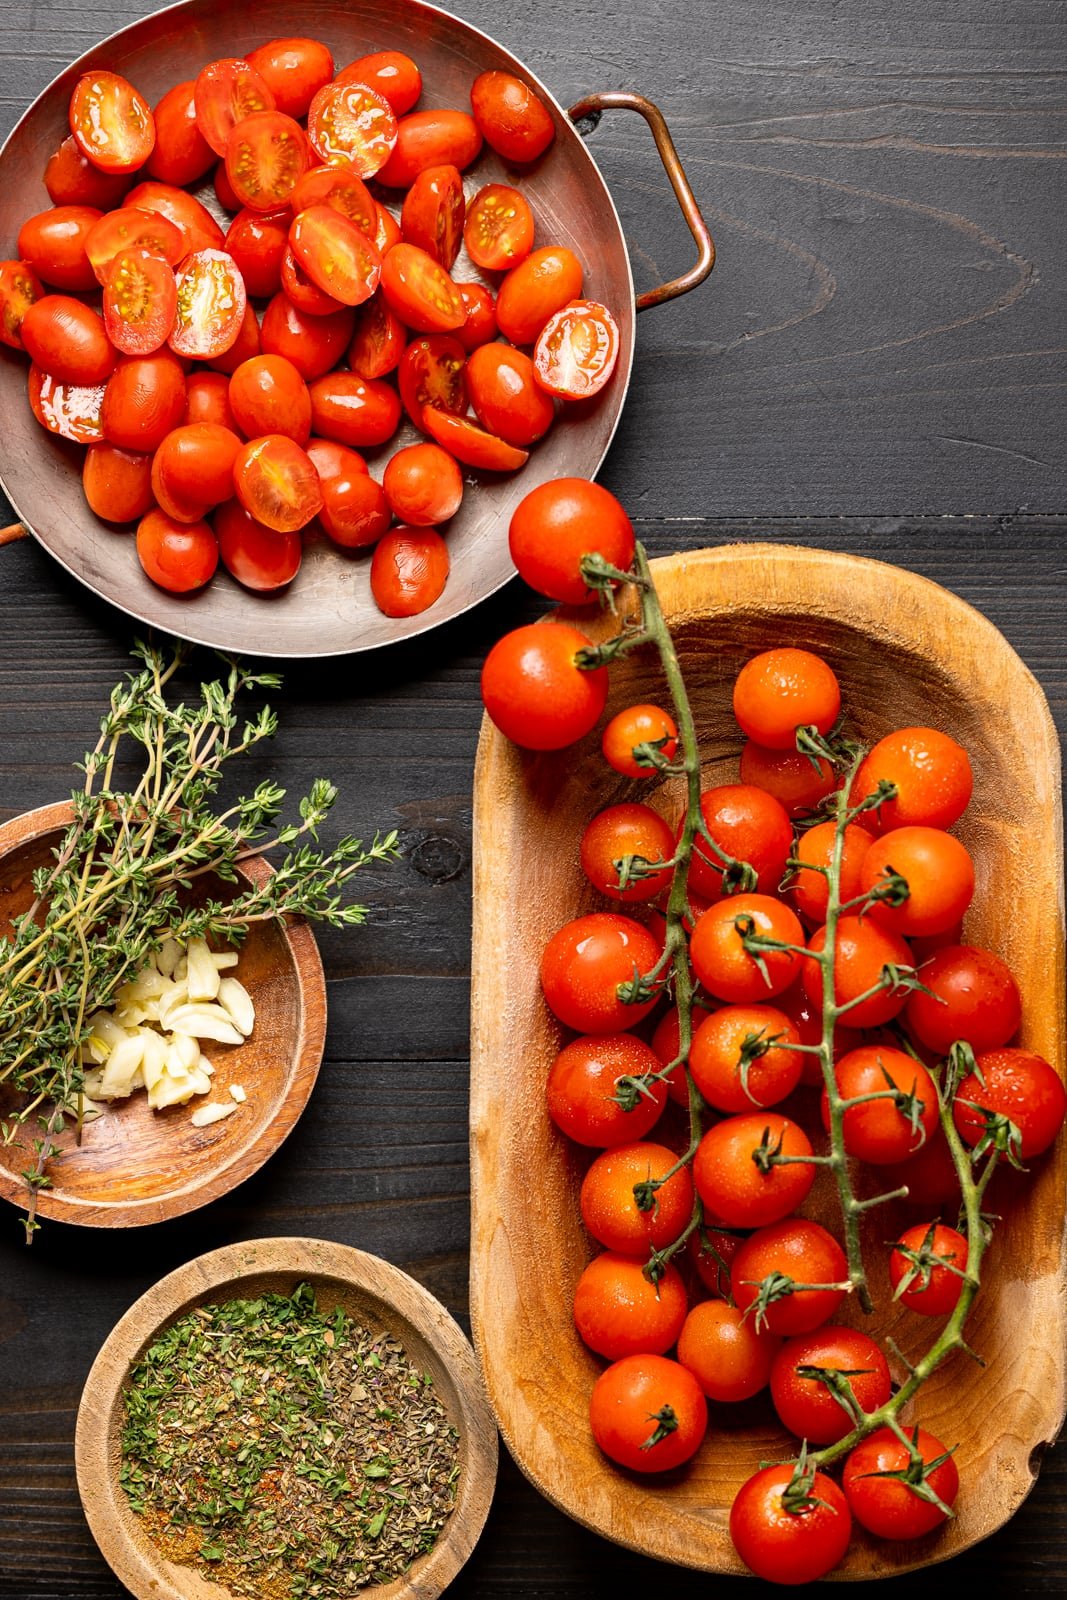 Two kinds of tomatoes in bowls on a black wood table along with herbs and seasonings.